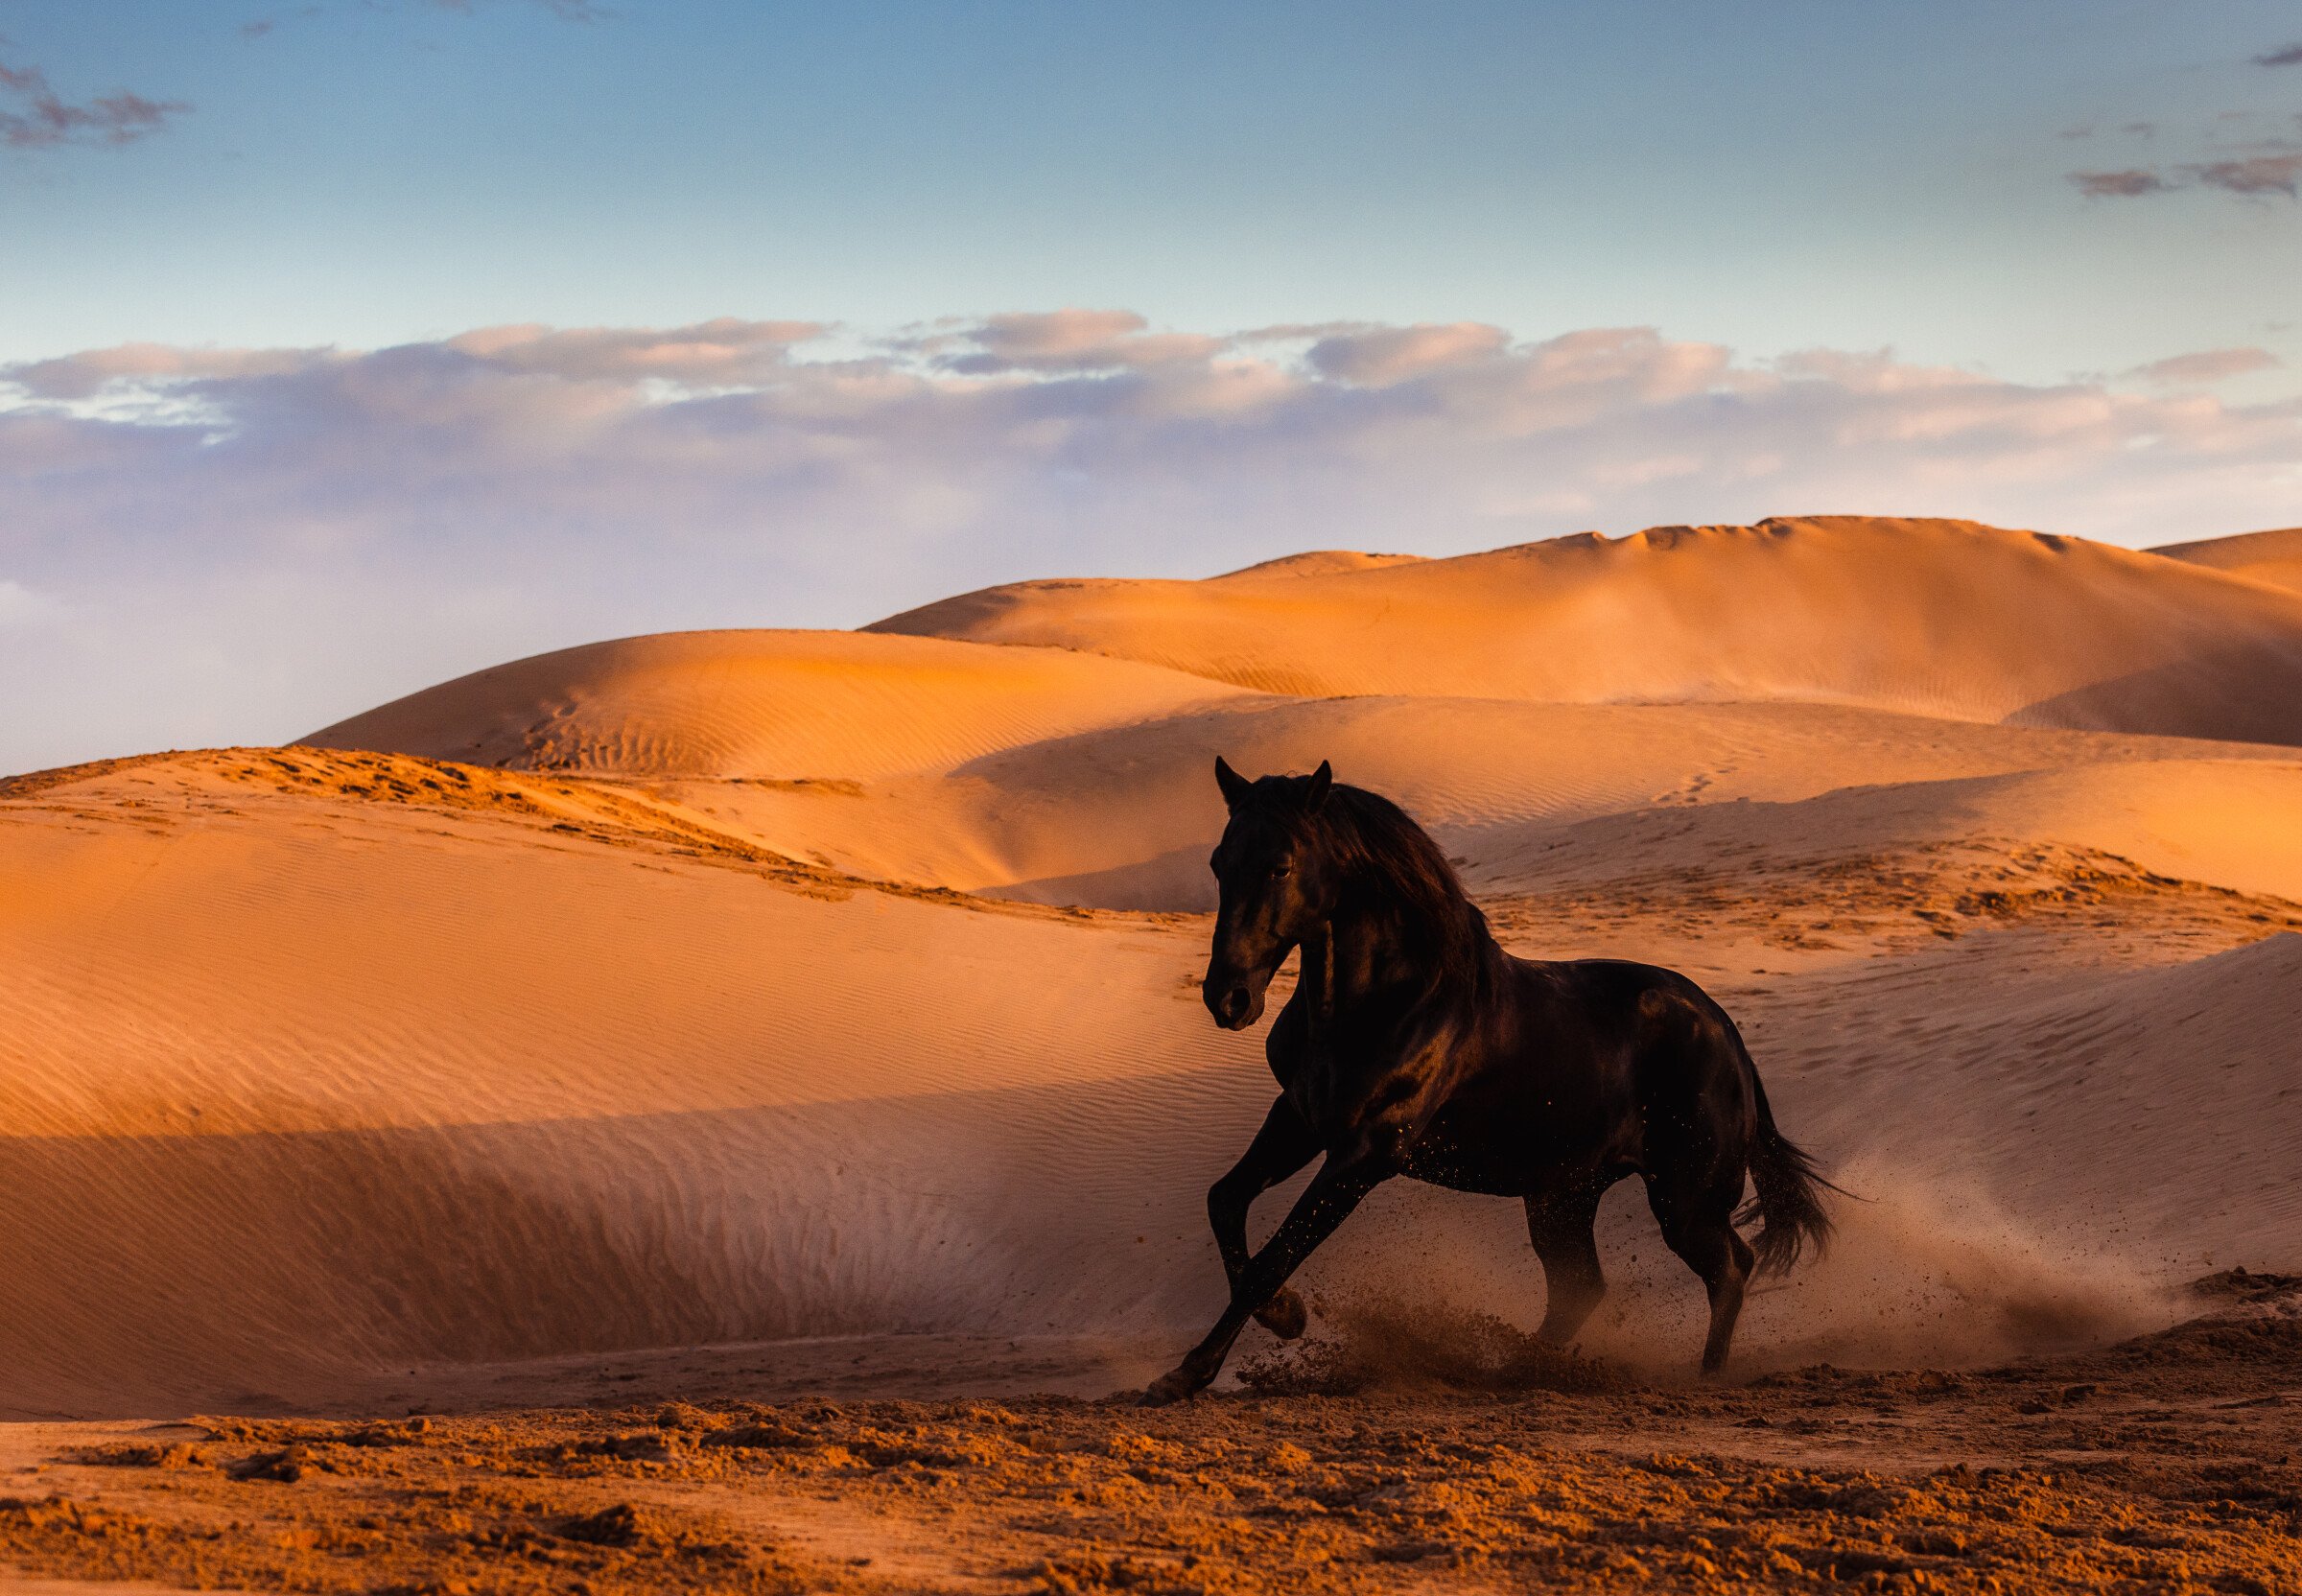 The benefits of a horse ride: trekking in the desert